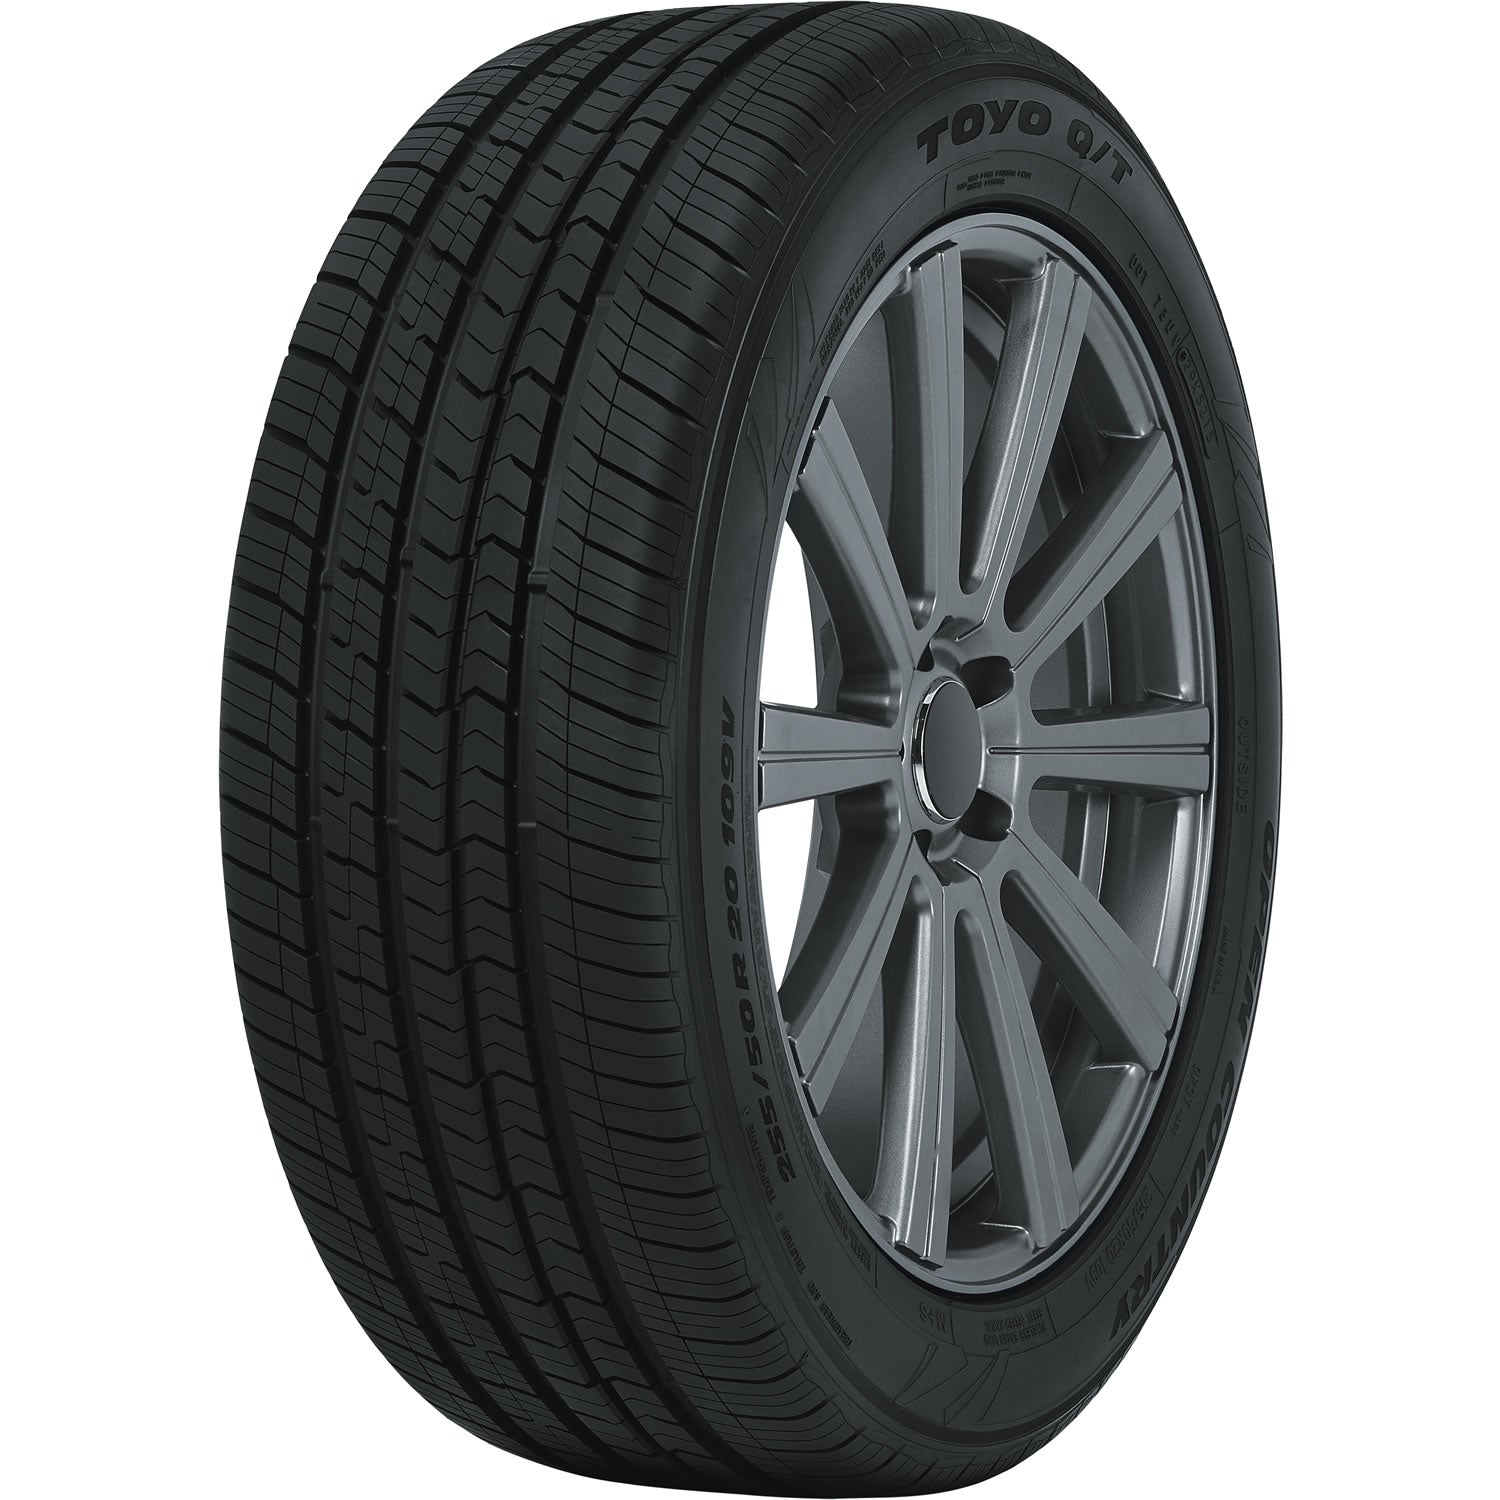 TOYO TIRES OPEN COUNTRY Q/T 255/65R16 (29.1X10.2R 16) Tires